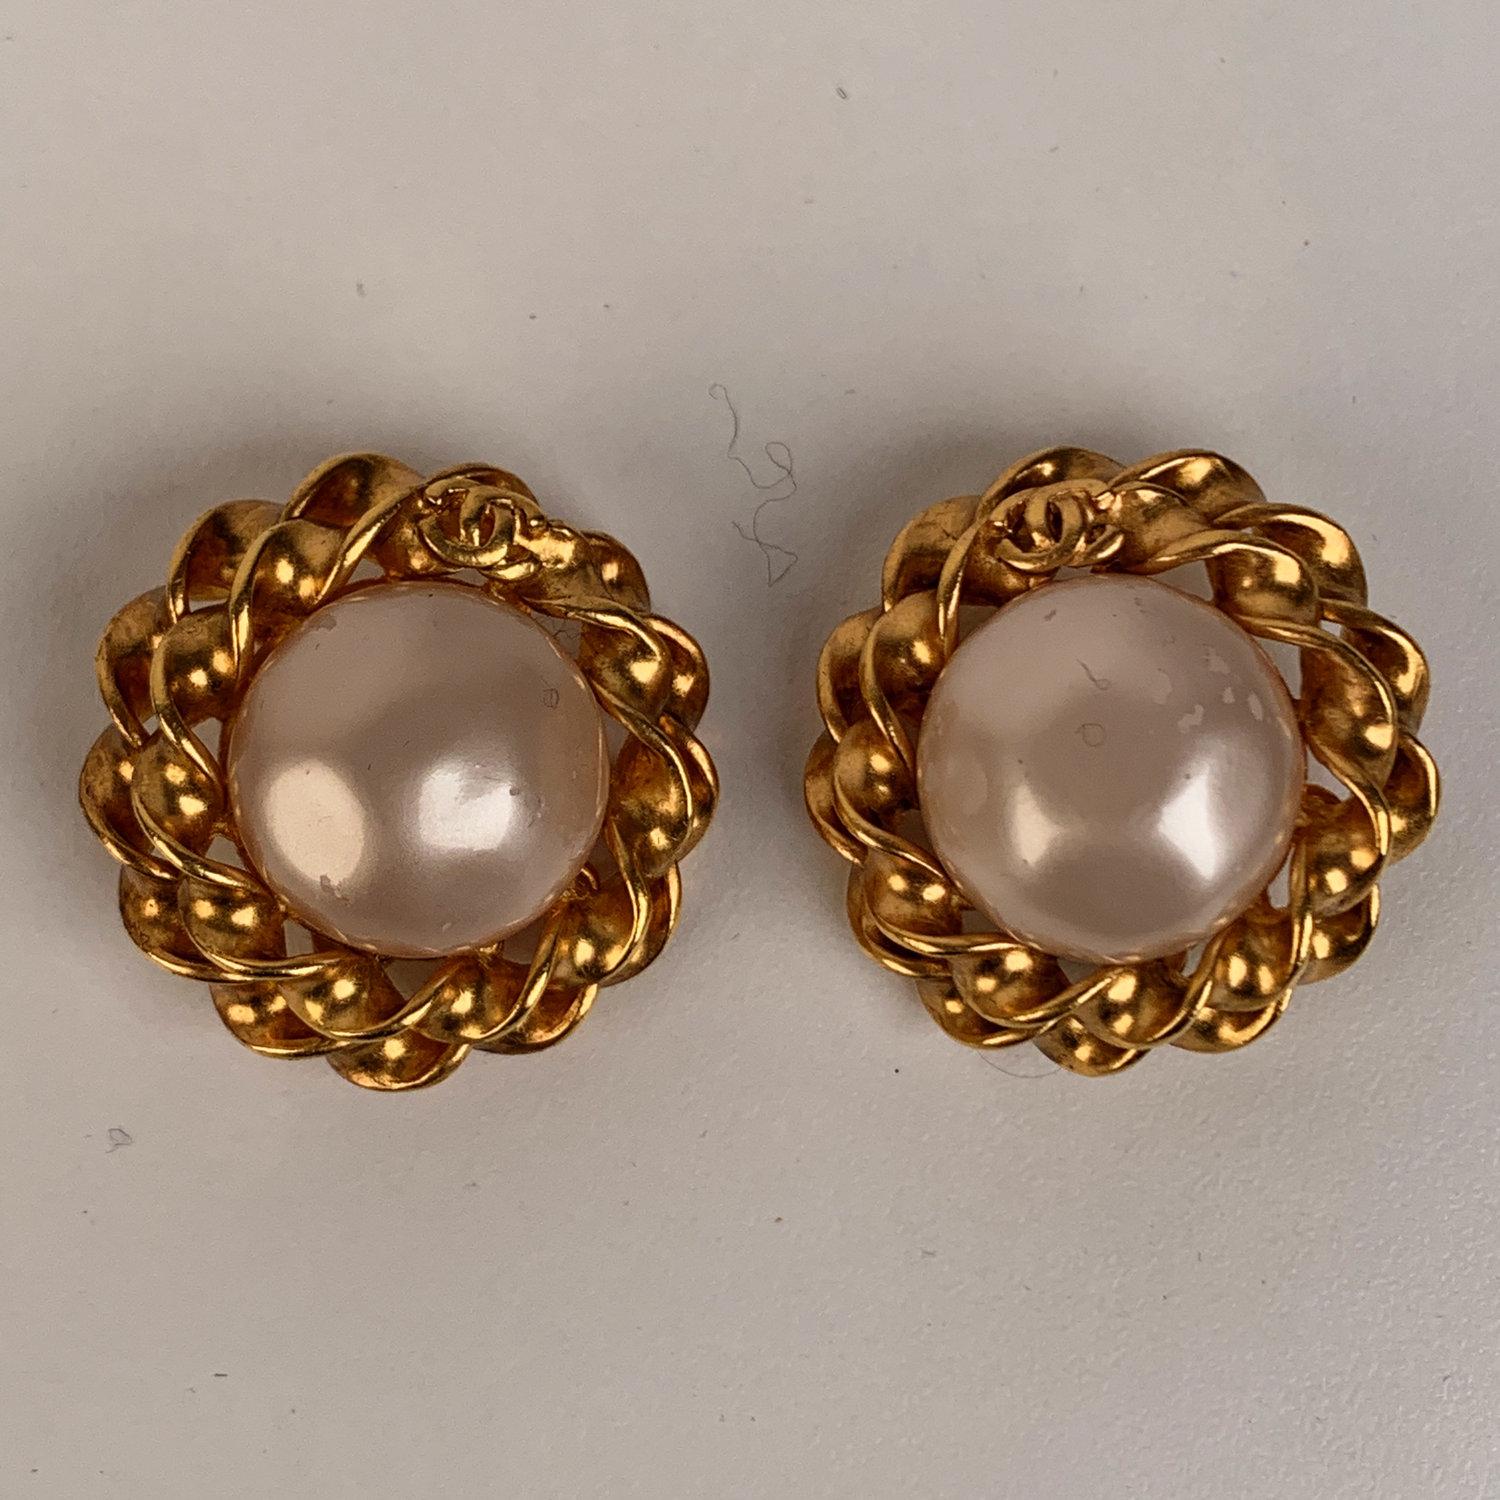 - Gorgeous vintage CHANEL earrings 
- Glass Pearl and gold metal twisted ribbon
- CC - CHANEL logo detailing
- Clip-on earrings
- Signed ' C CHANEL R - 94 CC A - MADE IN FRANCE' in a oval mark.
- Diameter: 1,3 inch- 3,5 cm 
- Comes with original